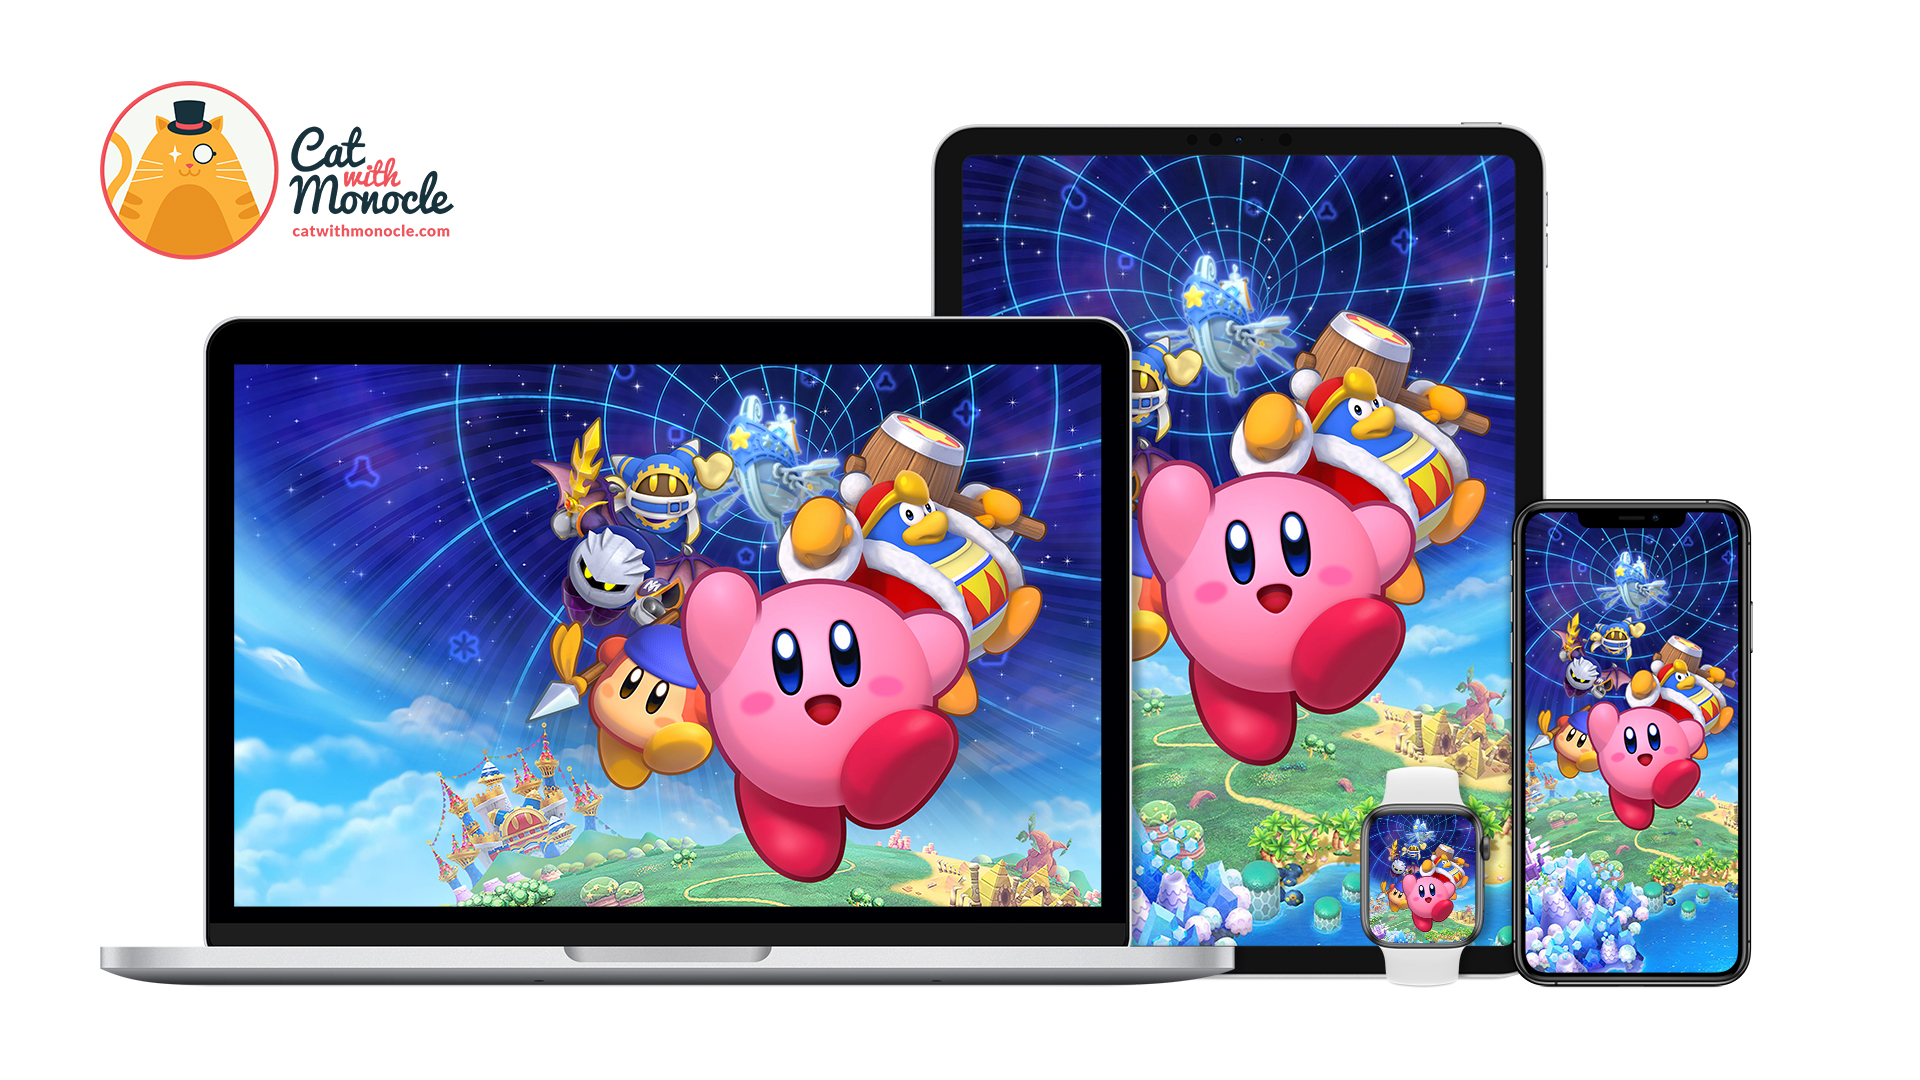 Kirby's Return to Dream Land Deluxe - Team Kirby Wallpaper - Cat